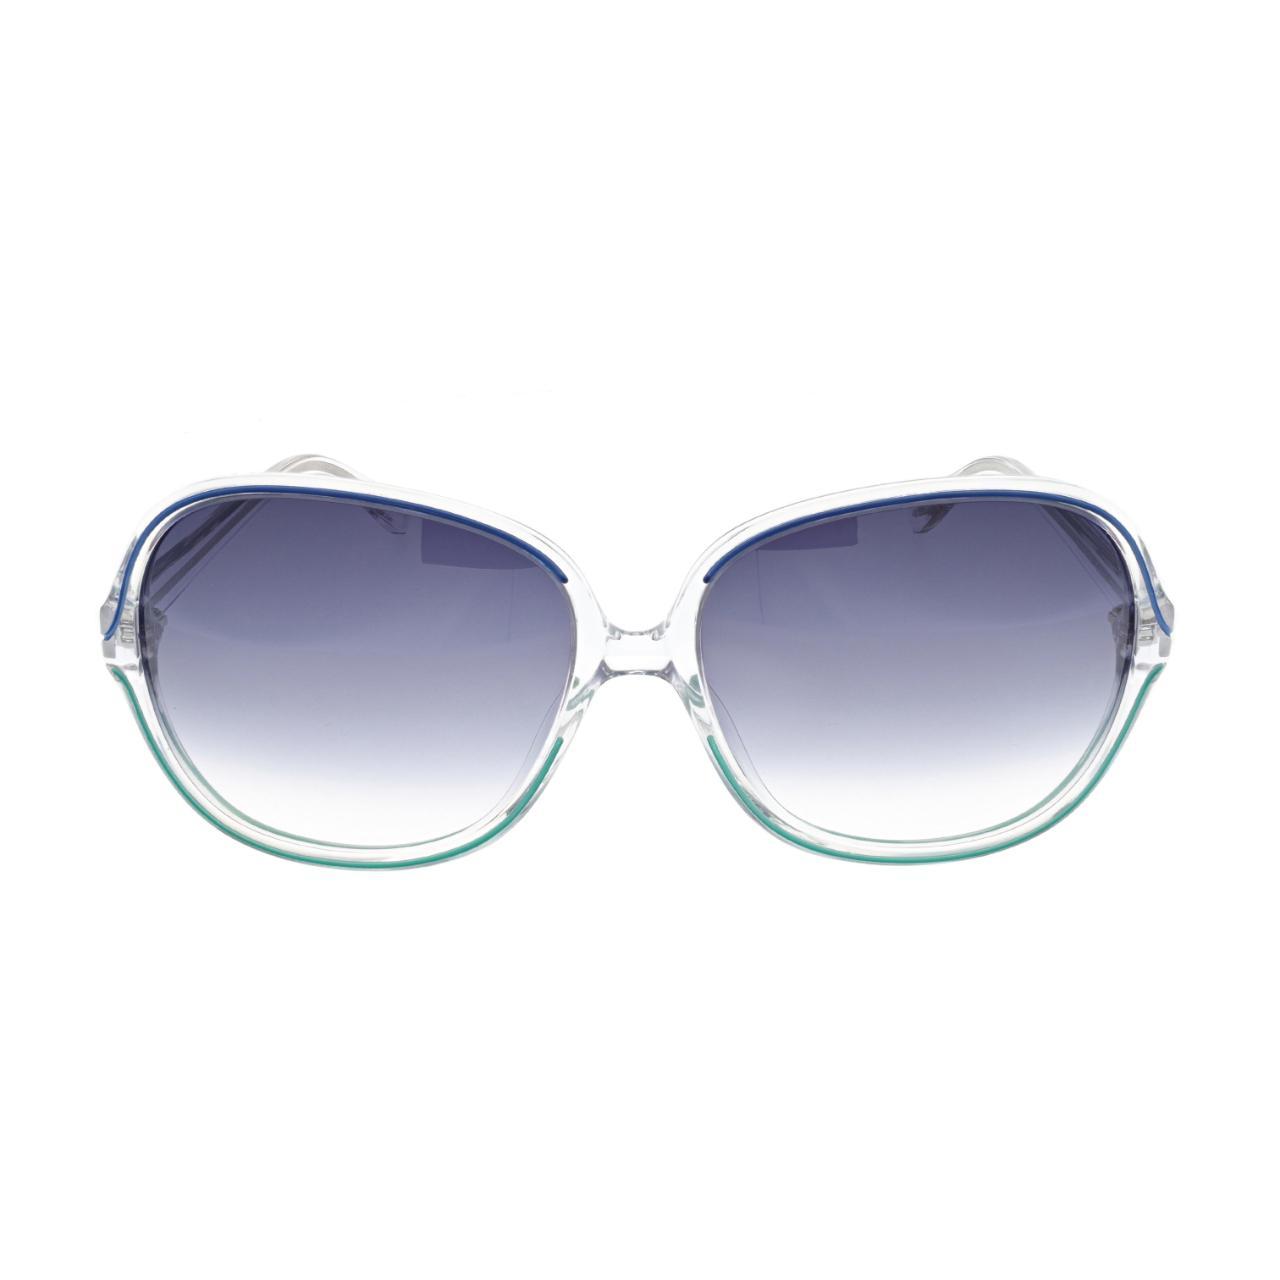 Product Image 2 - OLIVER PEOPLES SABINA SUNGLASSES -